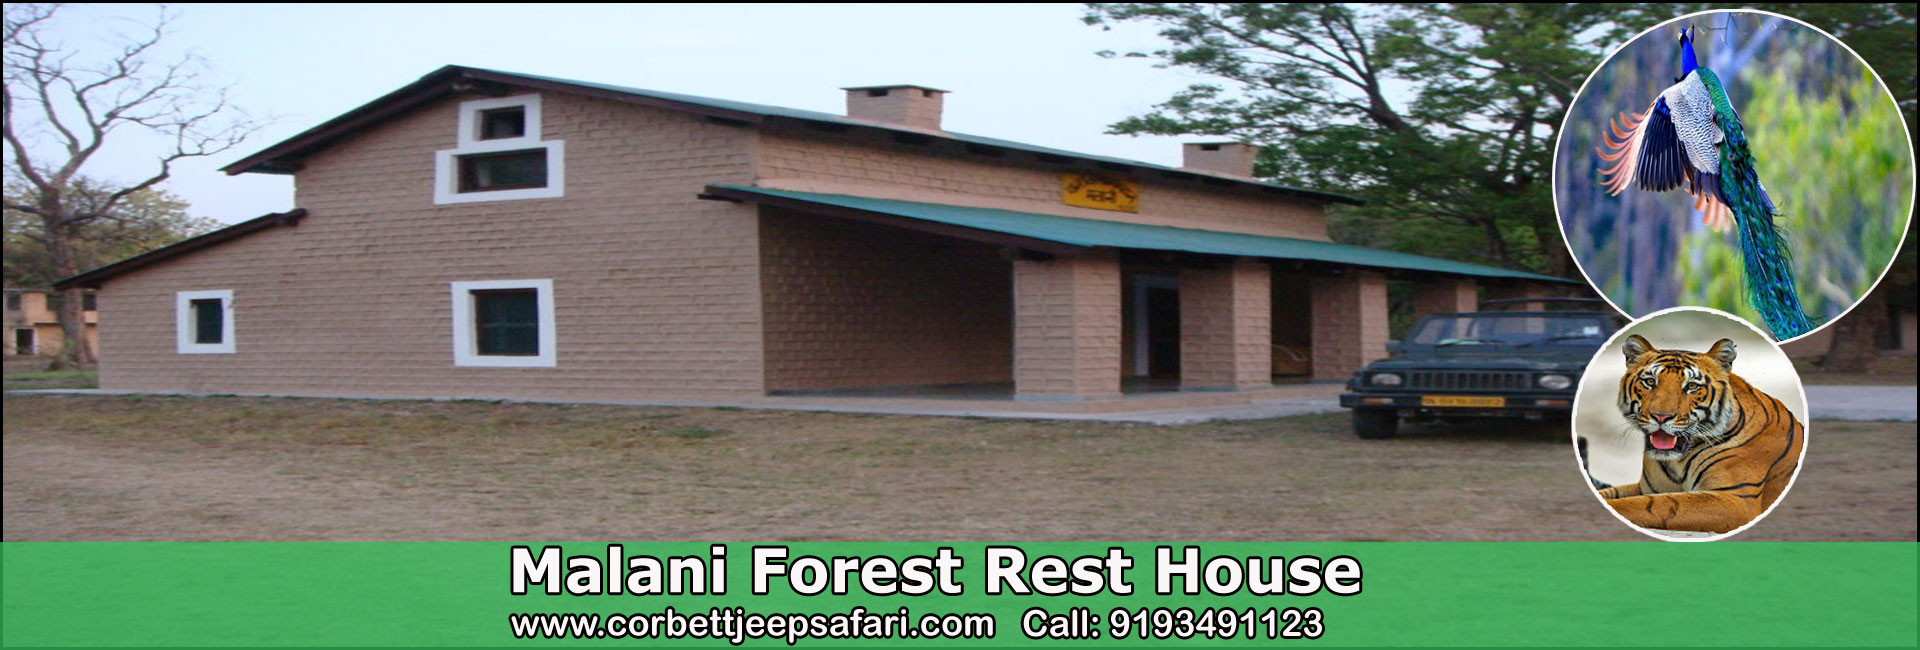 Malani Forest Rest House